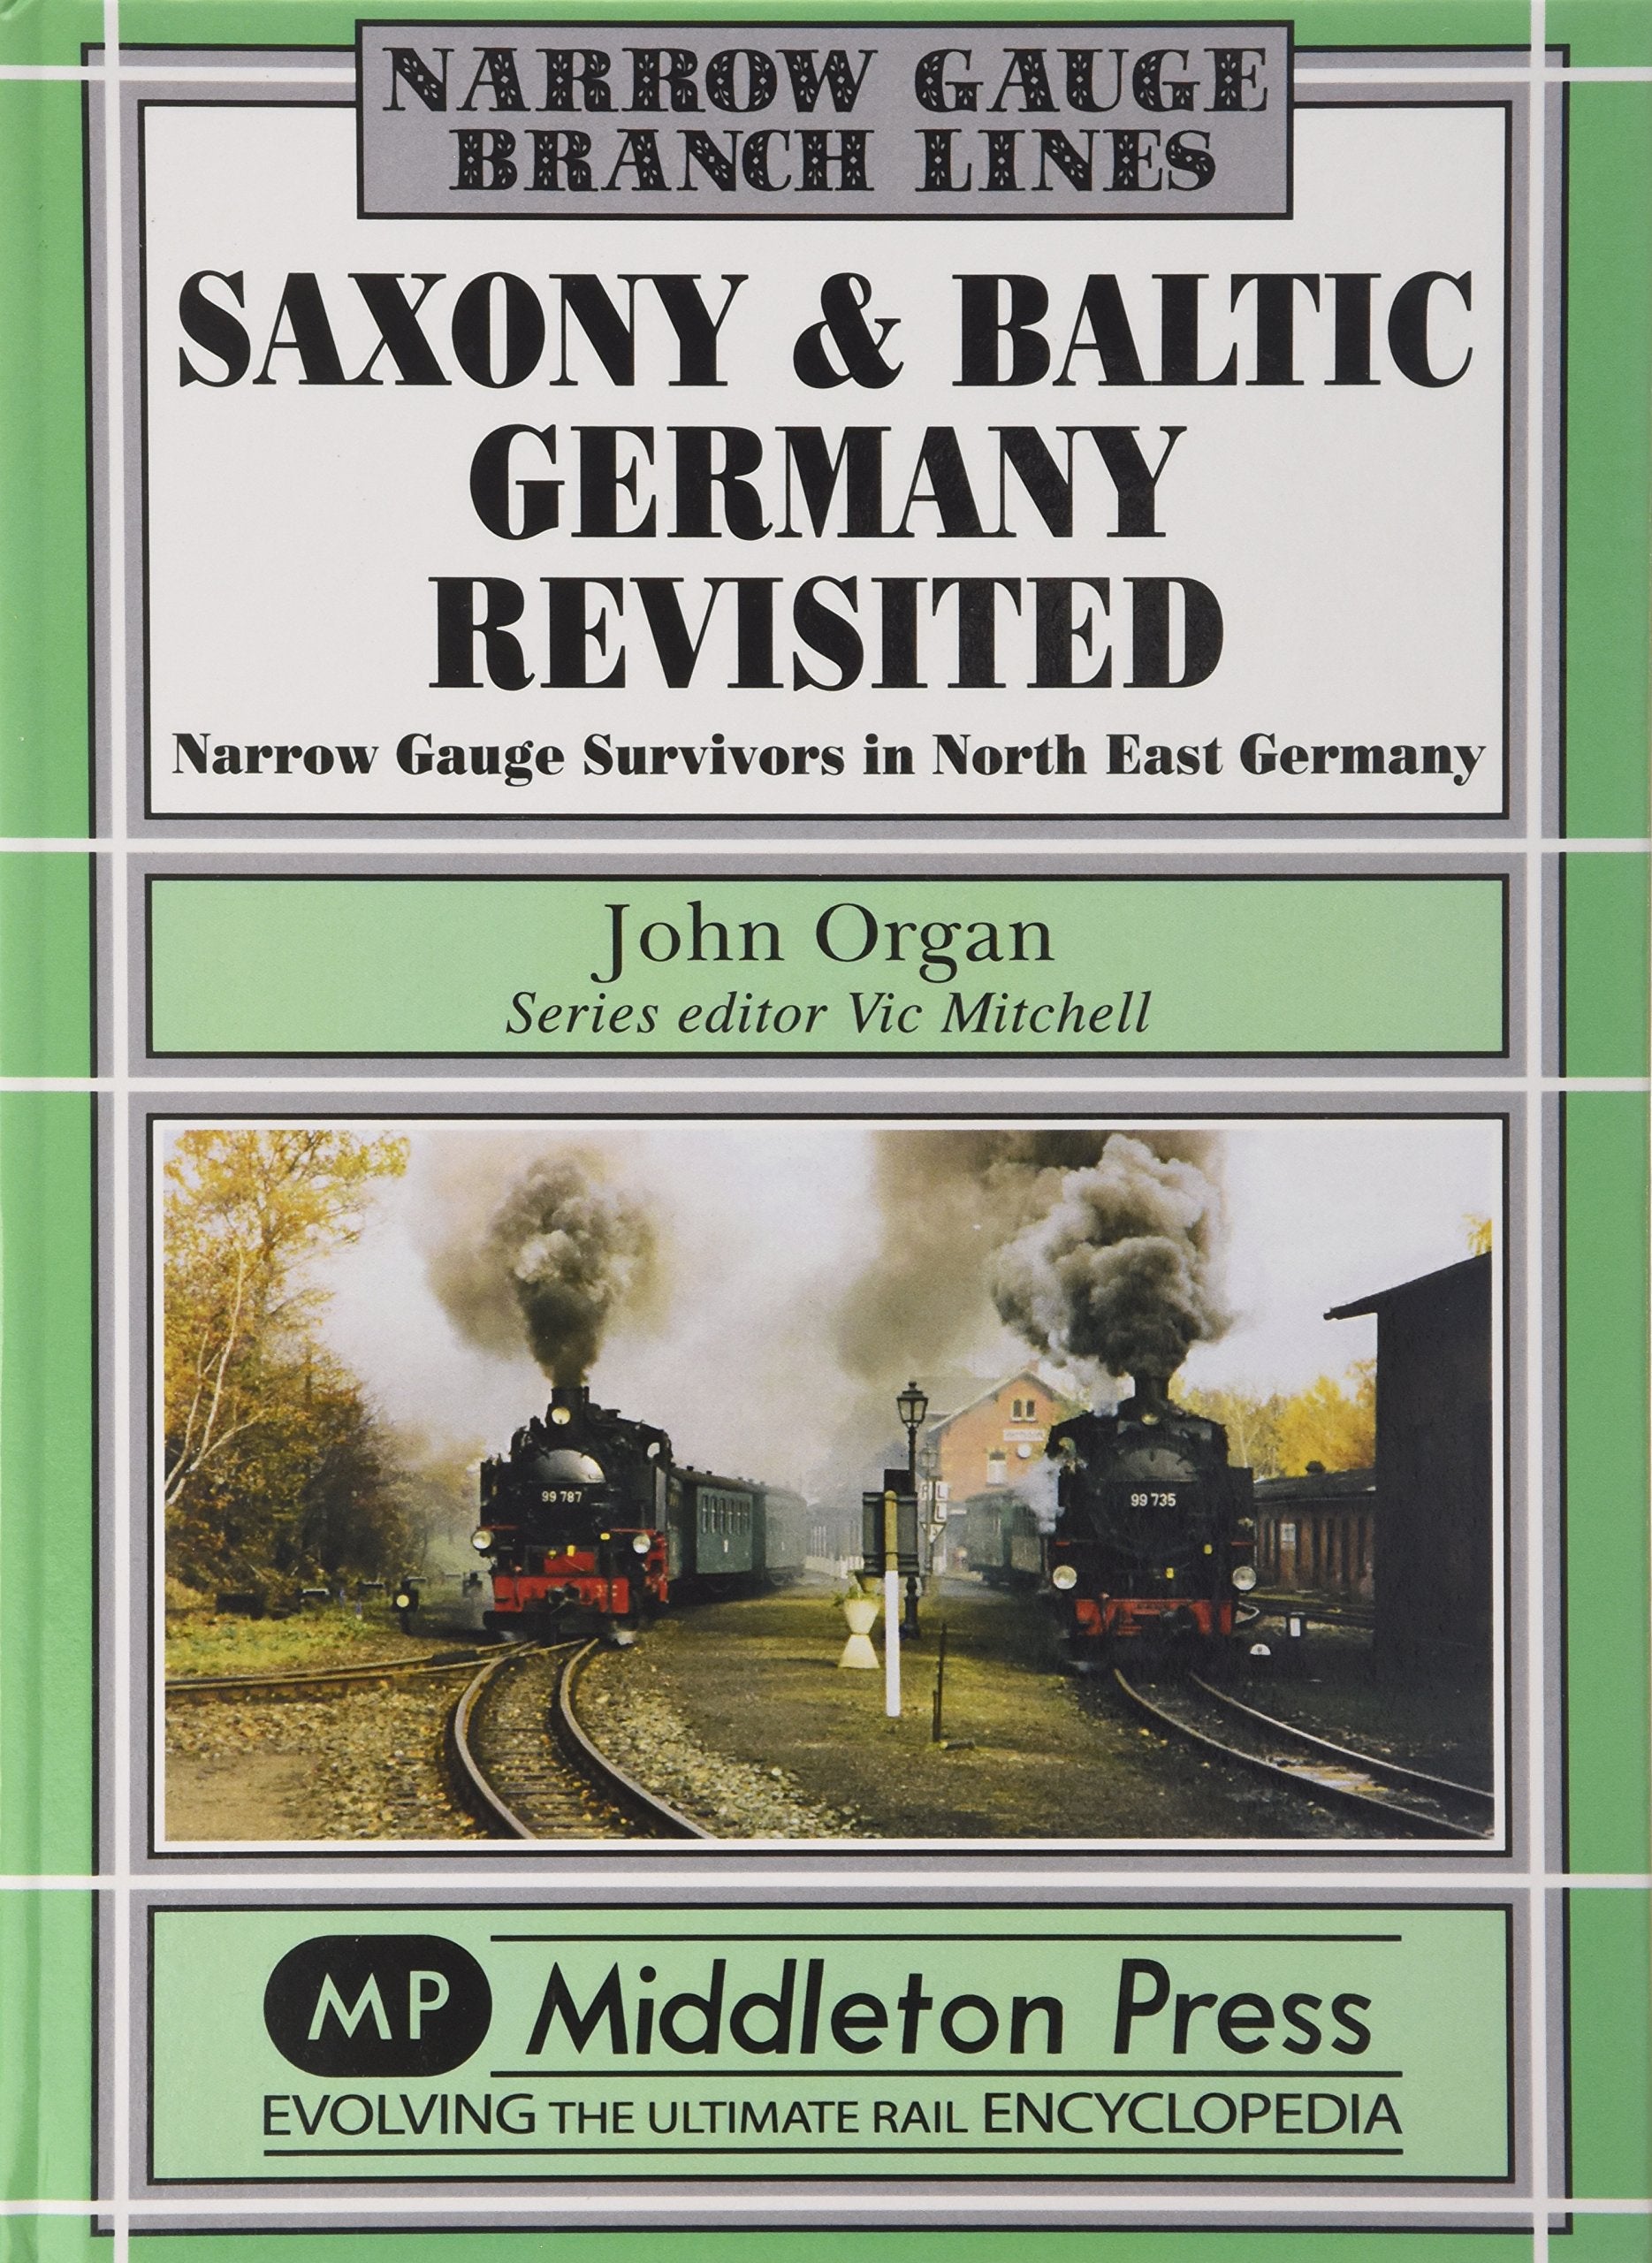 Narrow Gauge Saxony and Baltic Germany Revisited Narrow Gauge Survivors in North East Germany